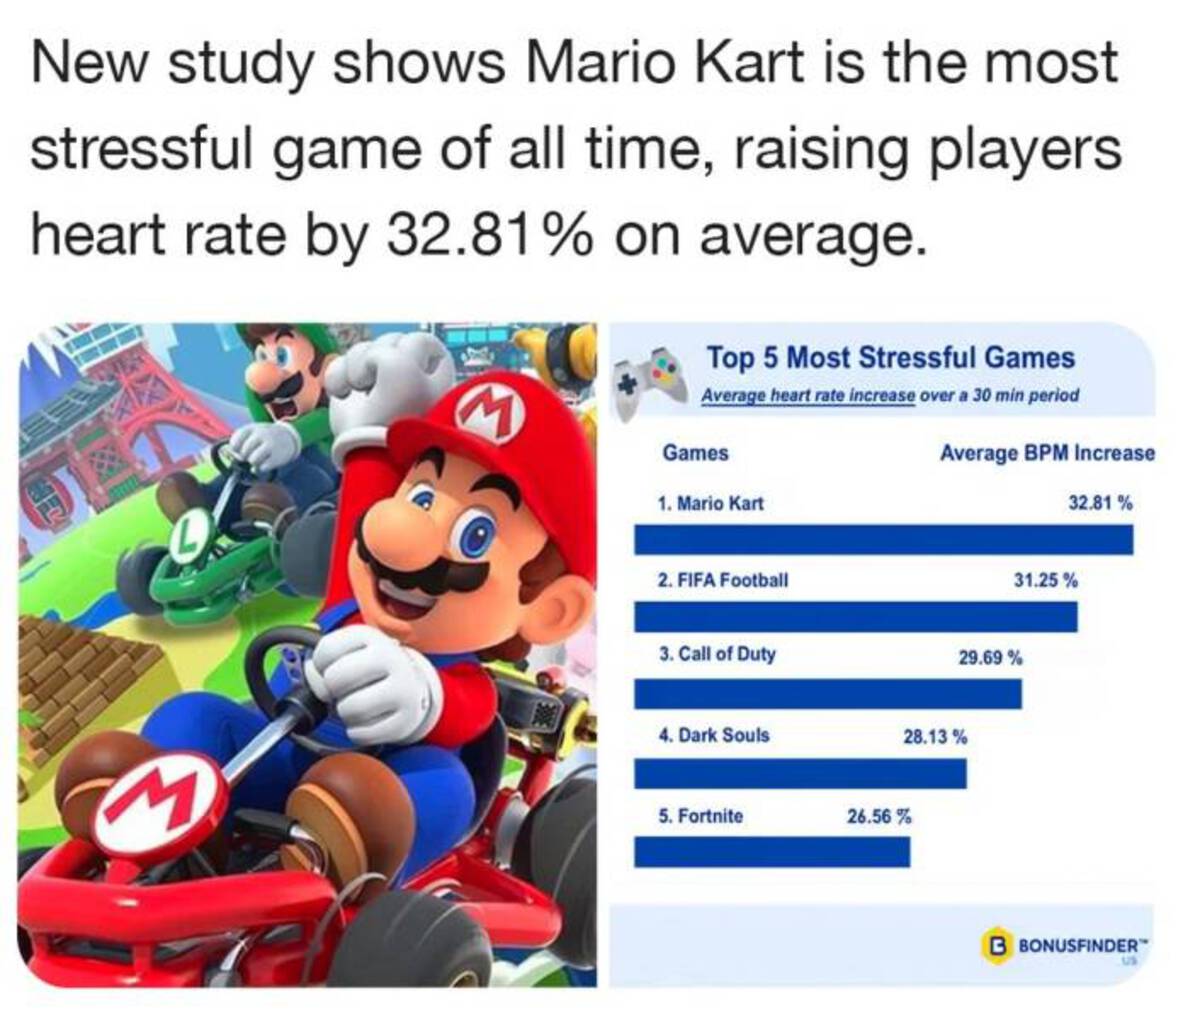 characters mario kart racing - New study shows Mario Kart is the most stressful game of all time, raising players heart rate by 32.81% on average. M Top 5 Most Stressful Games Average heart rate increase over a 30 min period Games 1. Mario Kart 2. Fifa Fo